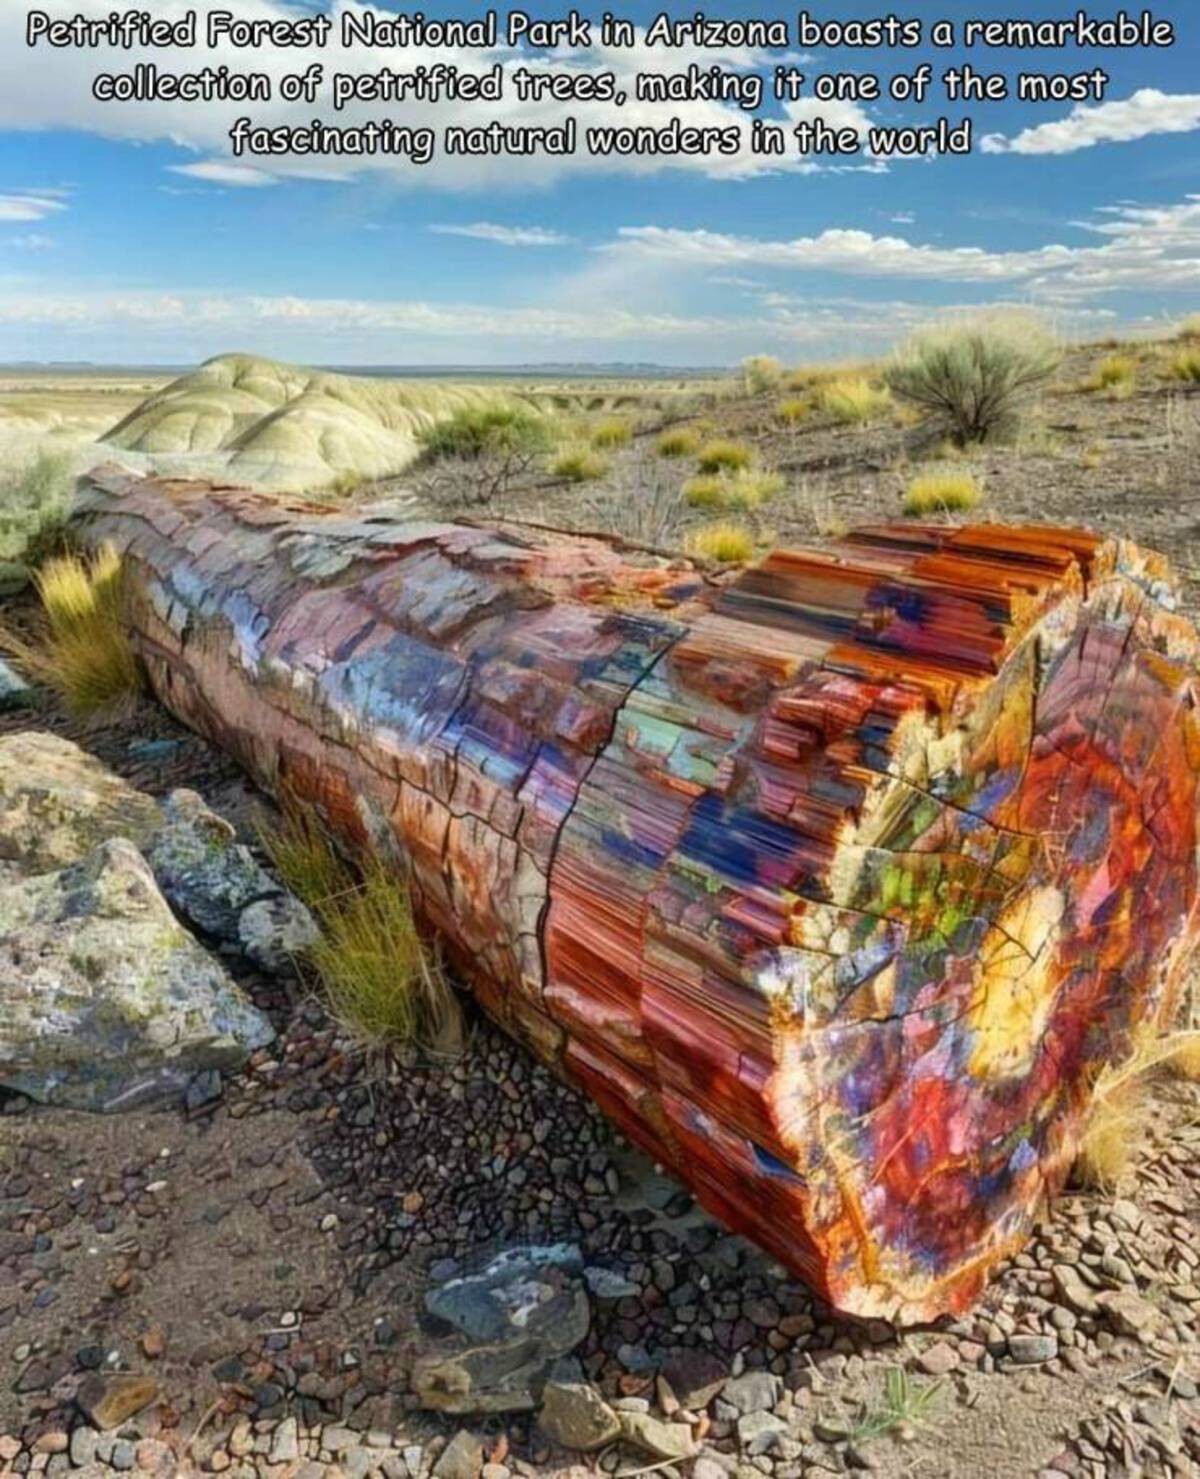 Petrified Forest National Park - Petrified Forest National Park in Arizona boasts a remarkable collection of petrified trees, making it one of the most fascinating natural wonders in the world